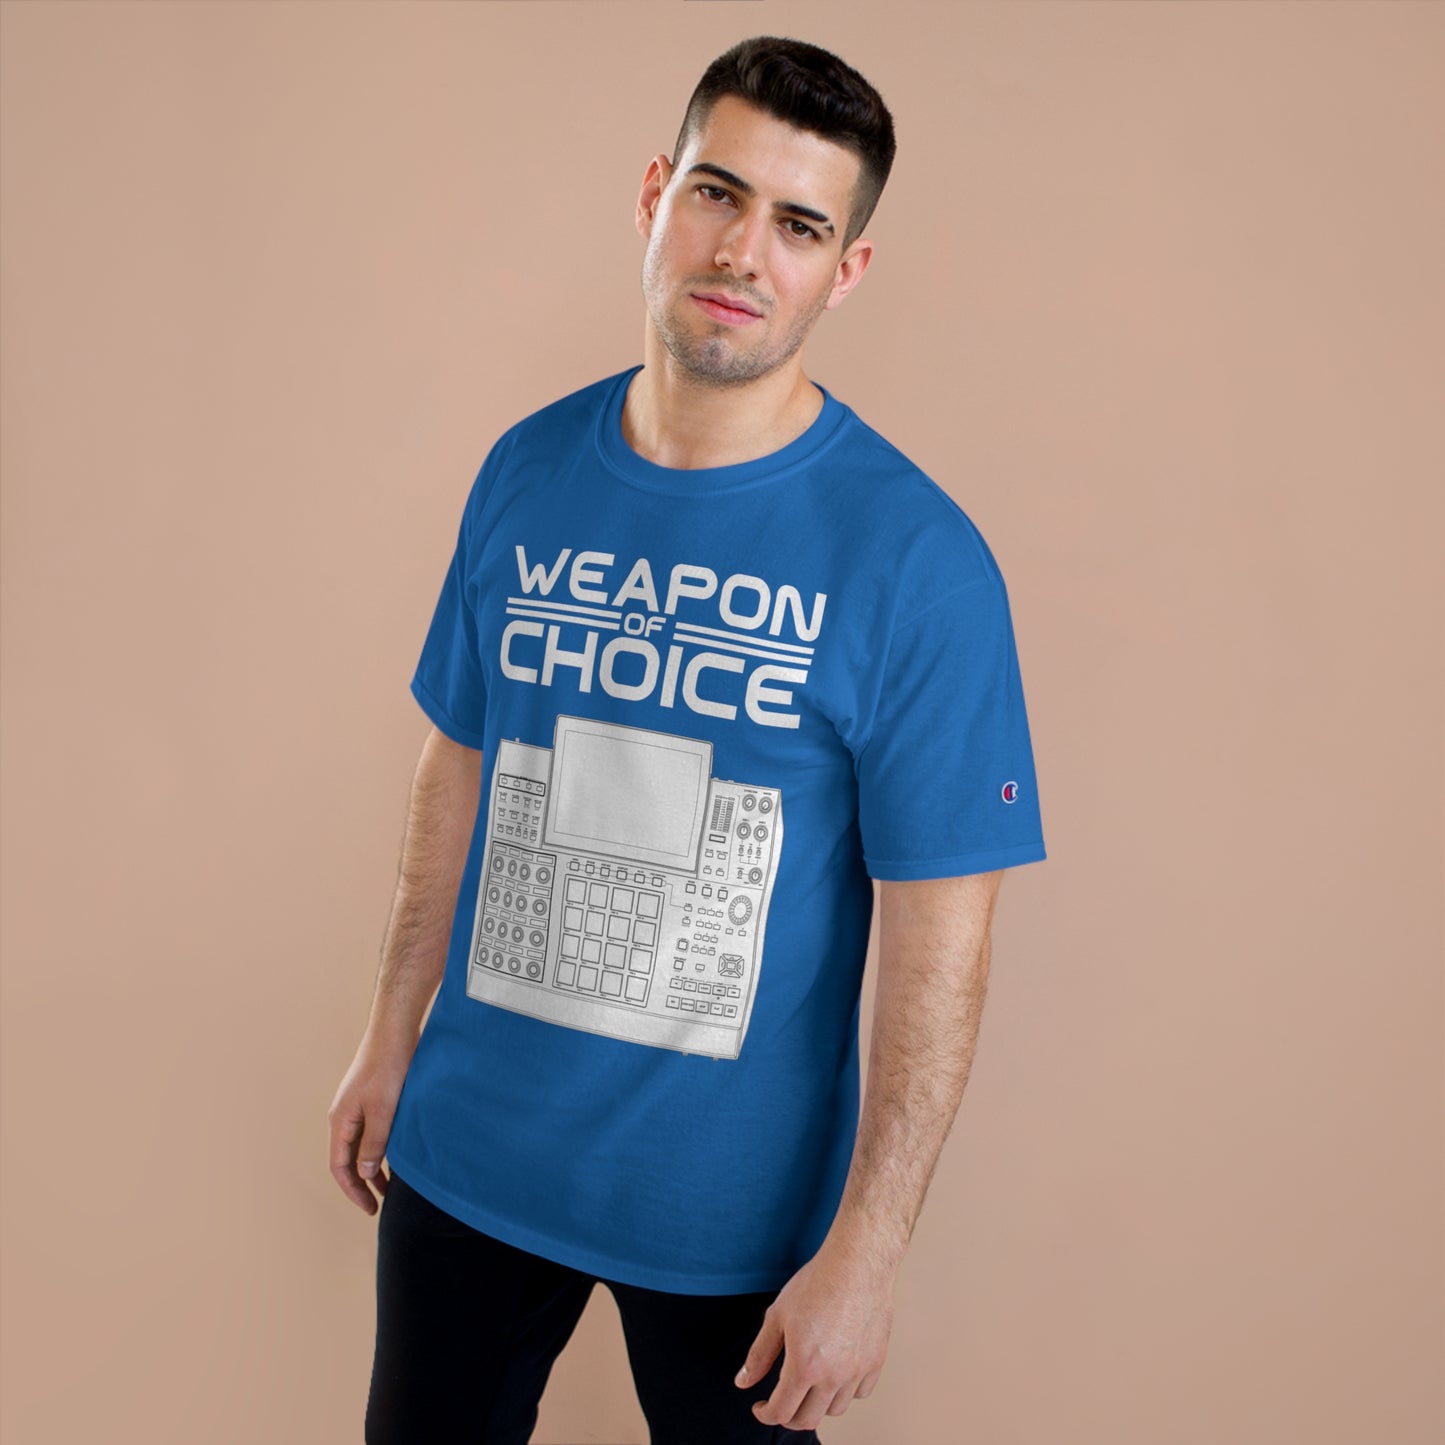 Weapon of Choice X or XSE Champion T-Shirt